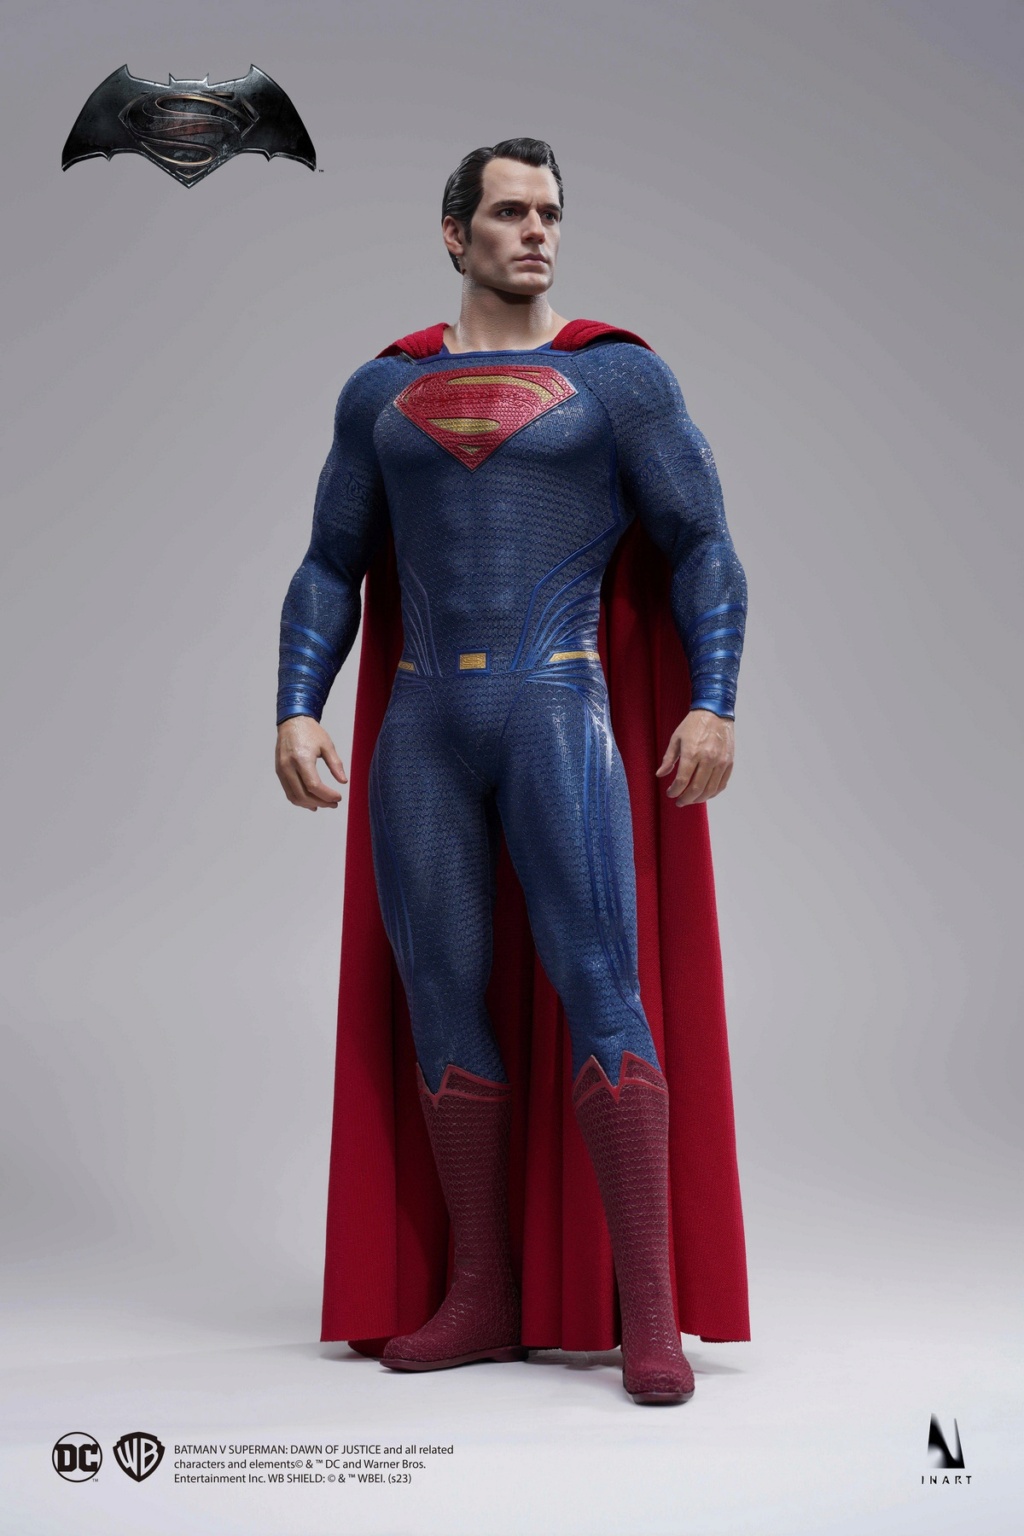 INART - NEW PRODUCT: InArt: 1/6 Scale BVS Superman 15294810